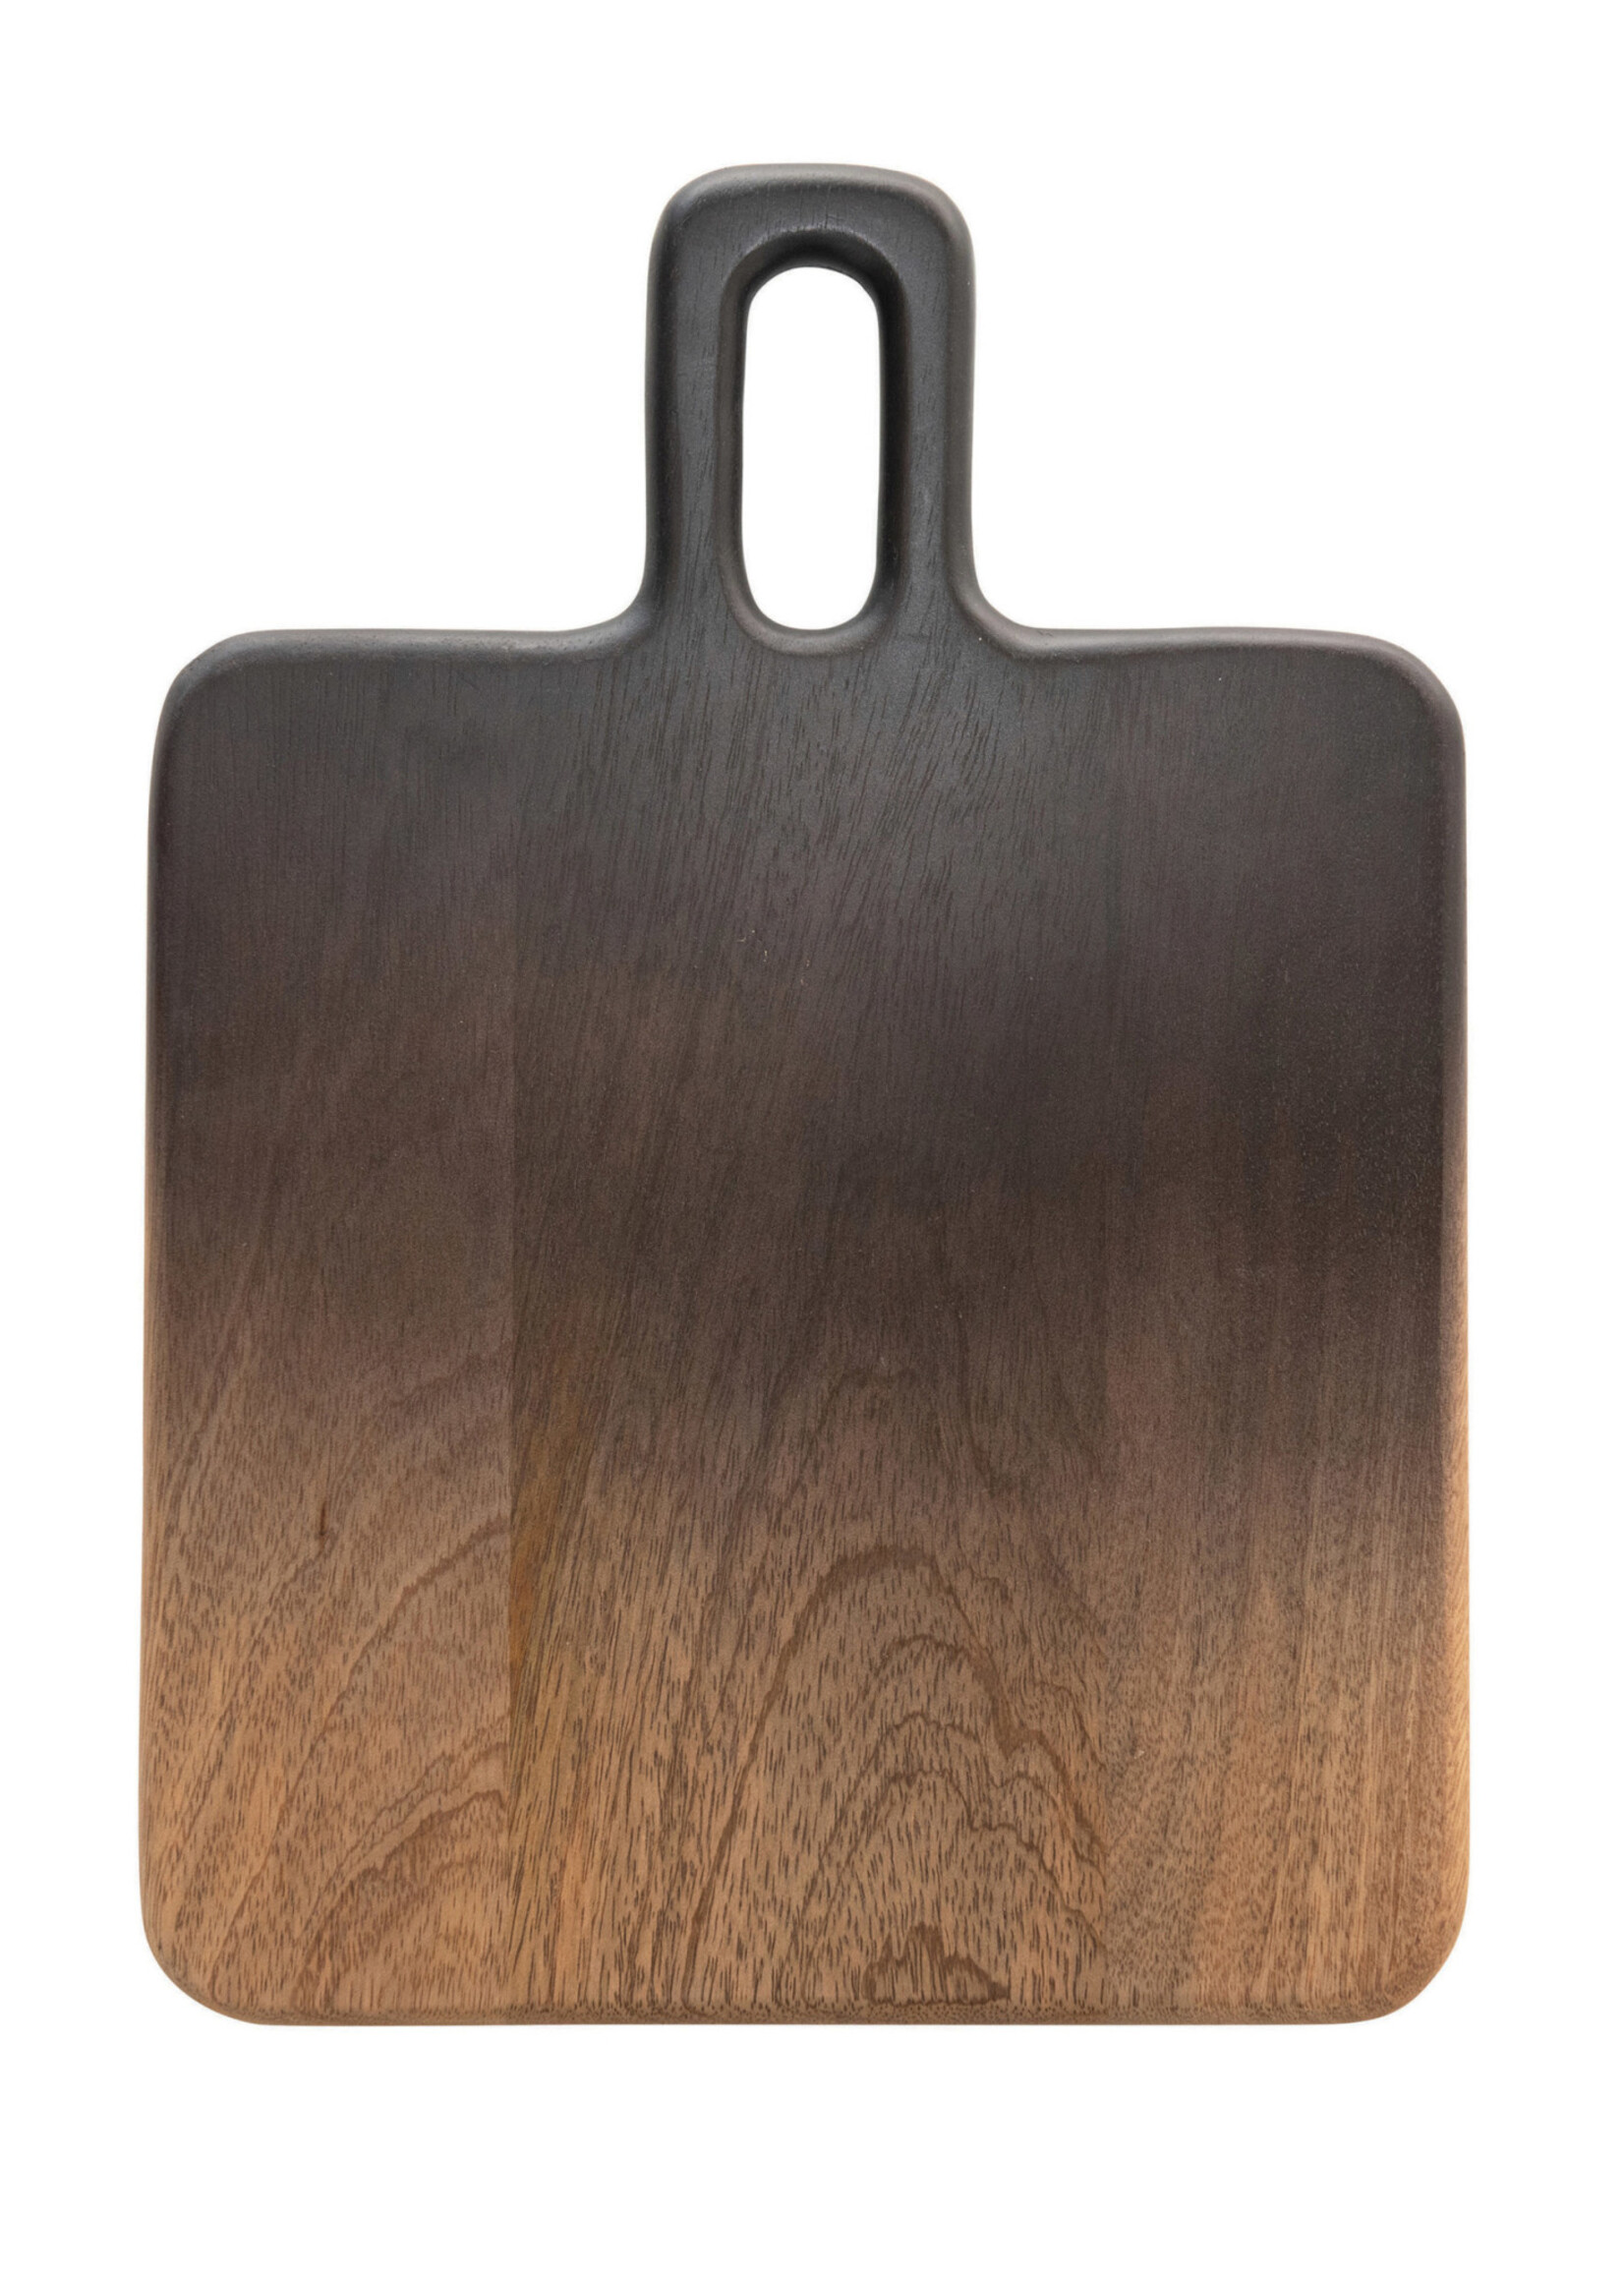 Bloomingville Mango Wood Cheese/Cutting Board with Handle